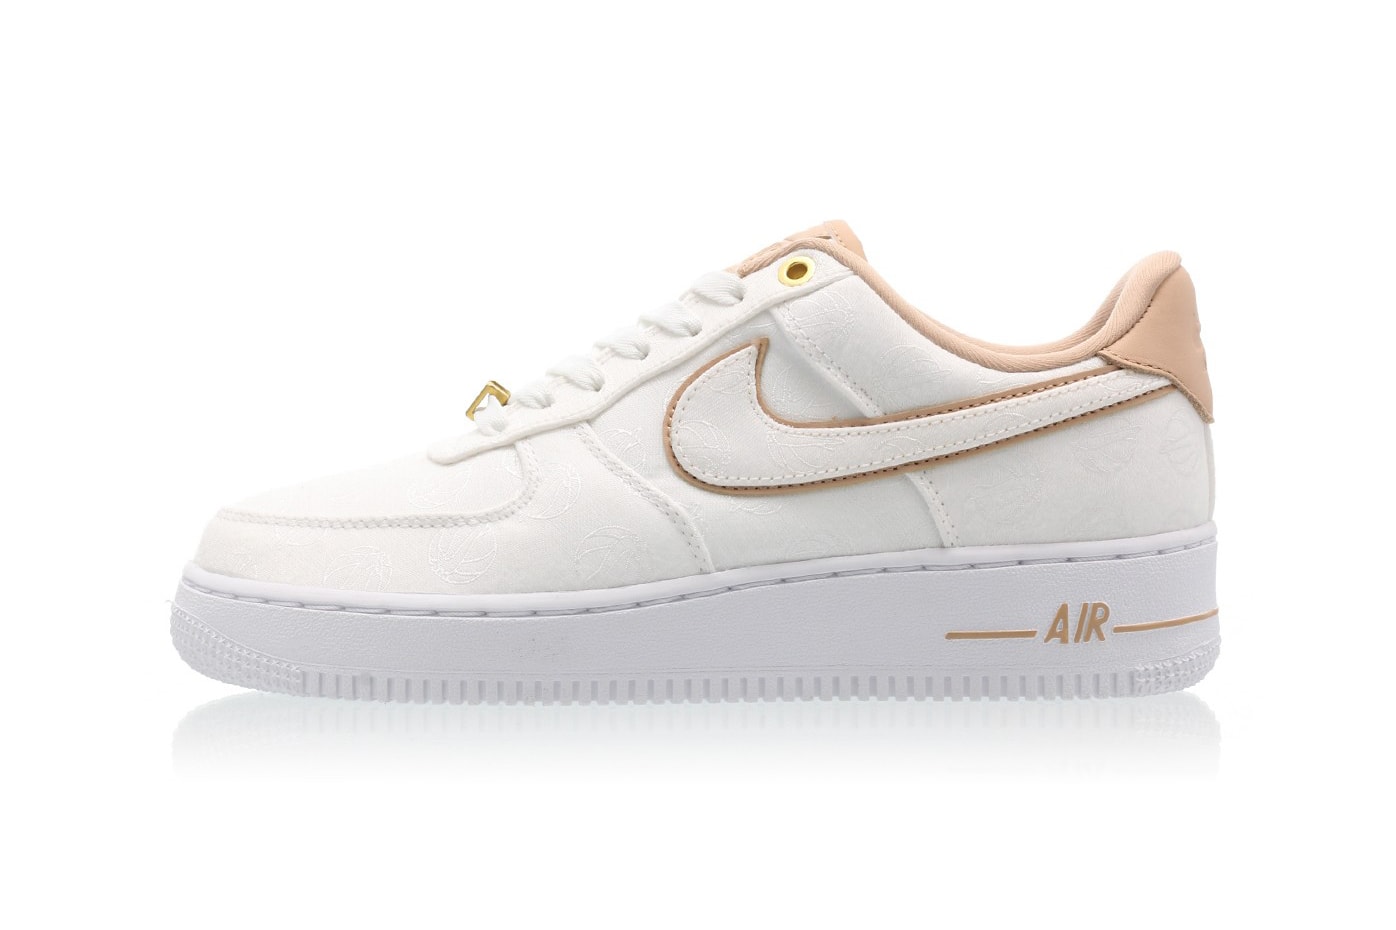 Nike Air Force 1 '07 LX in White Bio Beige Gold Hidden Basketball Womens Sneakers Trainers